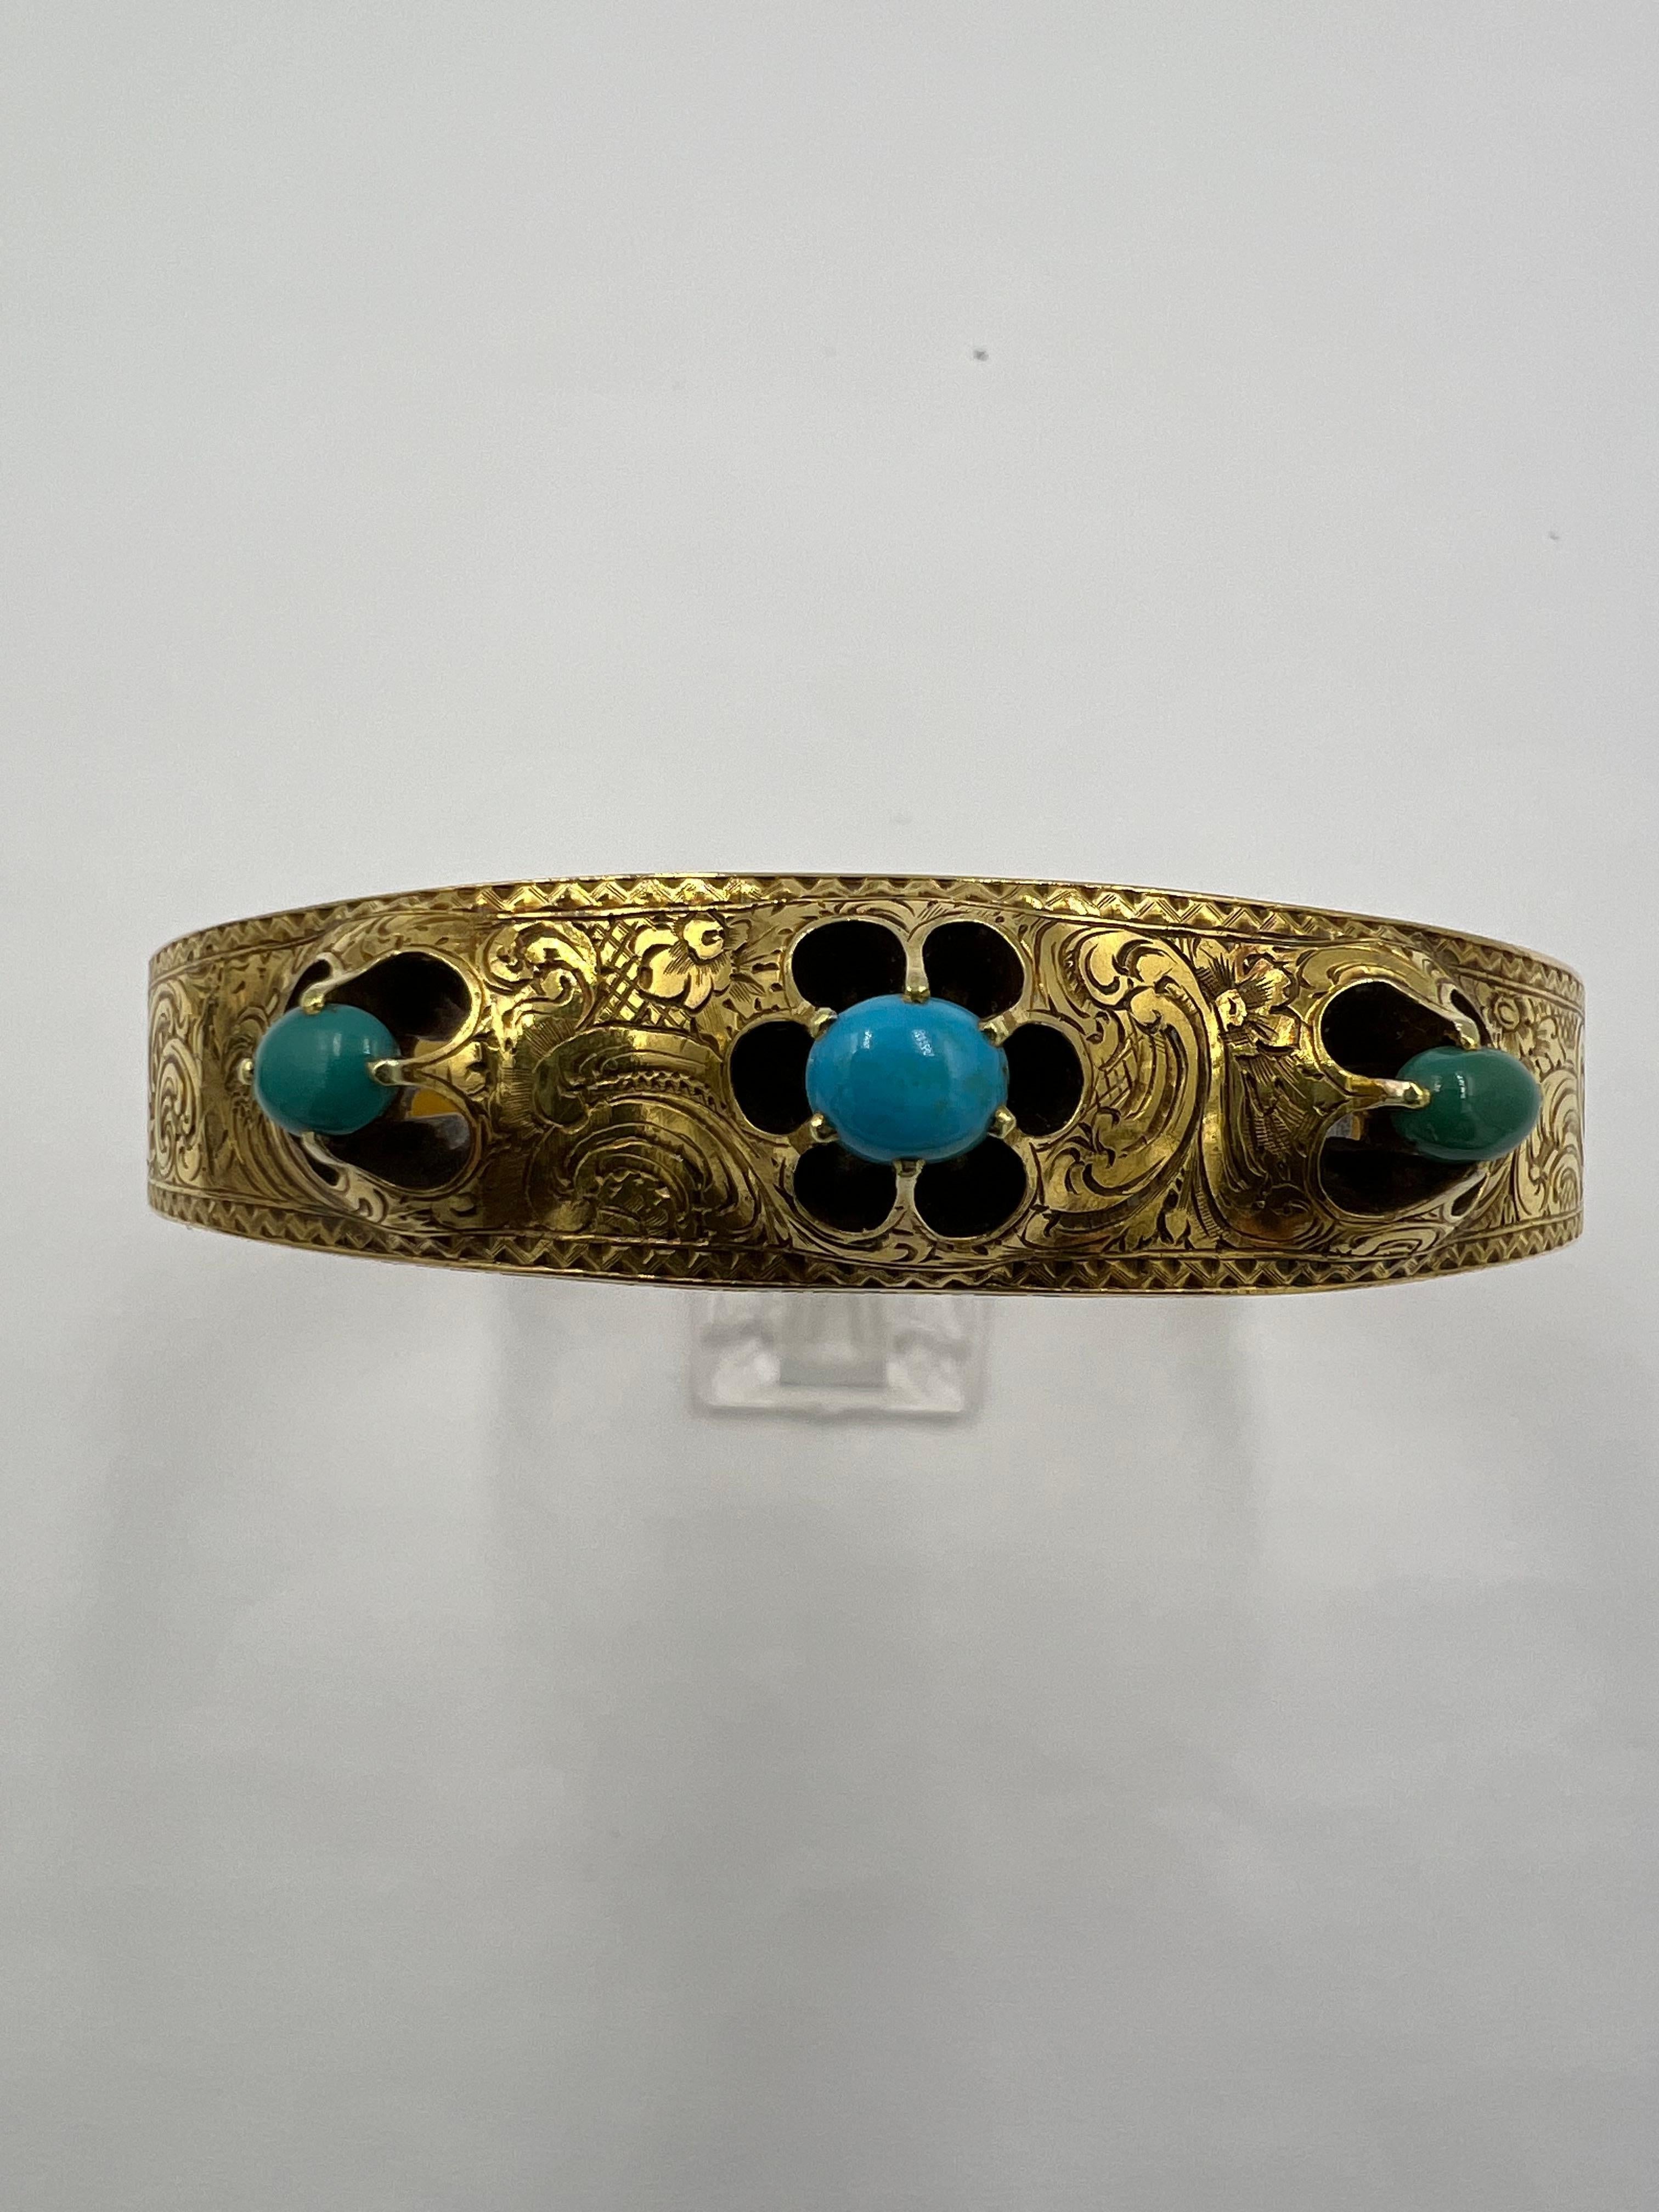 Victorian Turquoise yellow gold hand chased bangle bracelet, circa 1890.
This Victorian Turquoise Yellow Gold Hand Chased Bangle Bracelet is a stunning piece of jewelry that is sure to turn heads and make a statement. Crafted with intricate